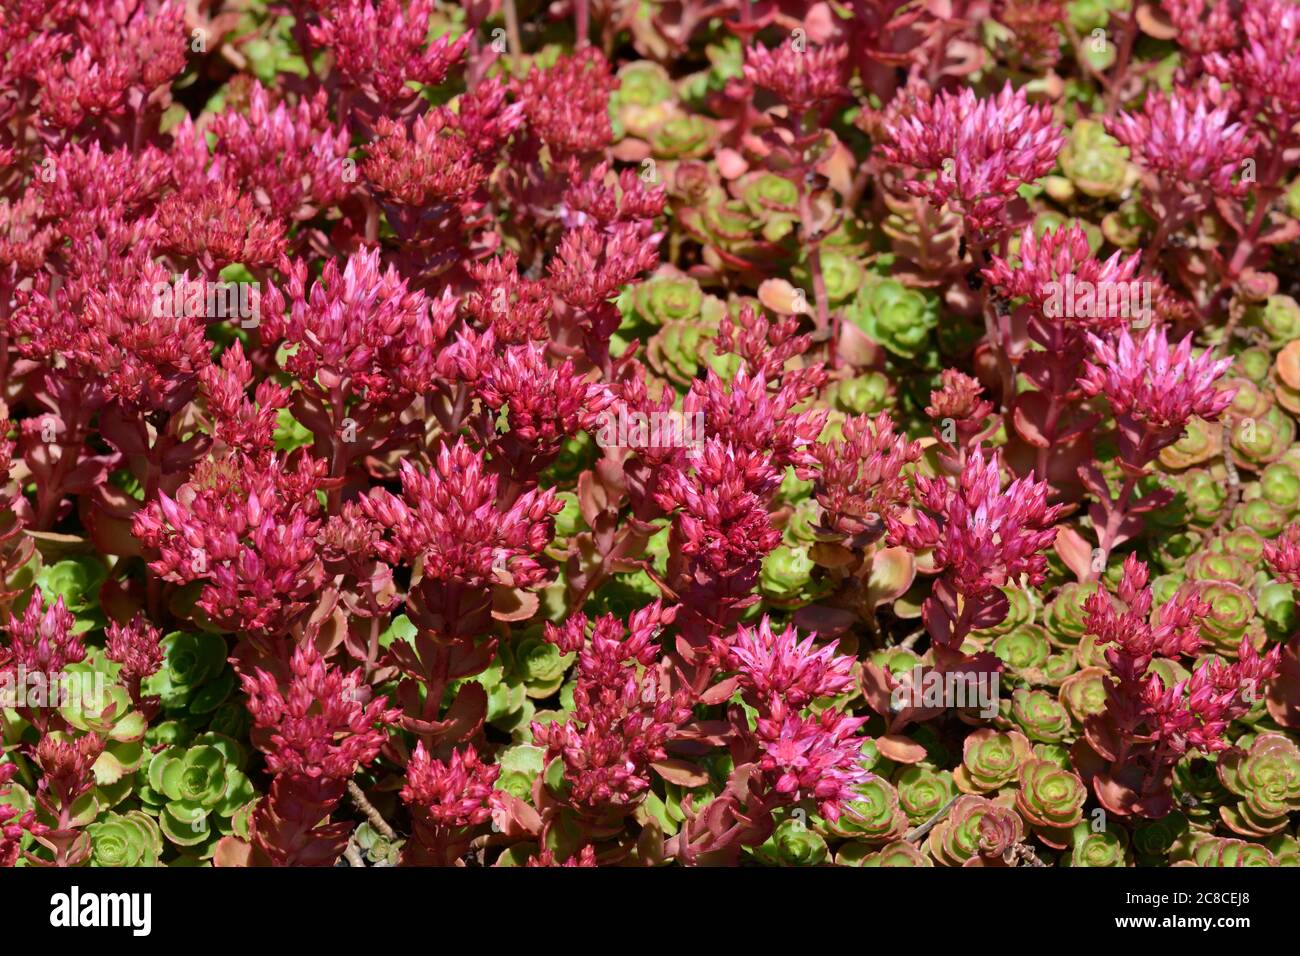 Dragons Blood Sedum High Resolution Stock Photography And Images Alamy